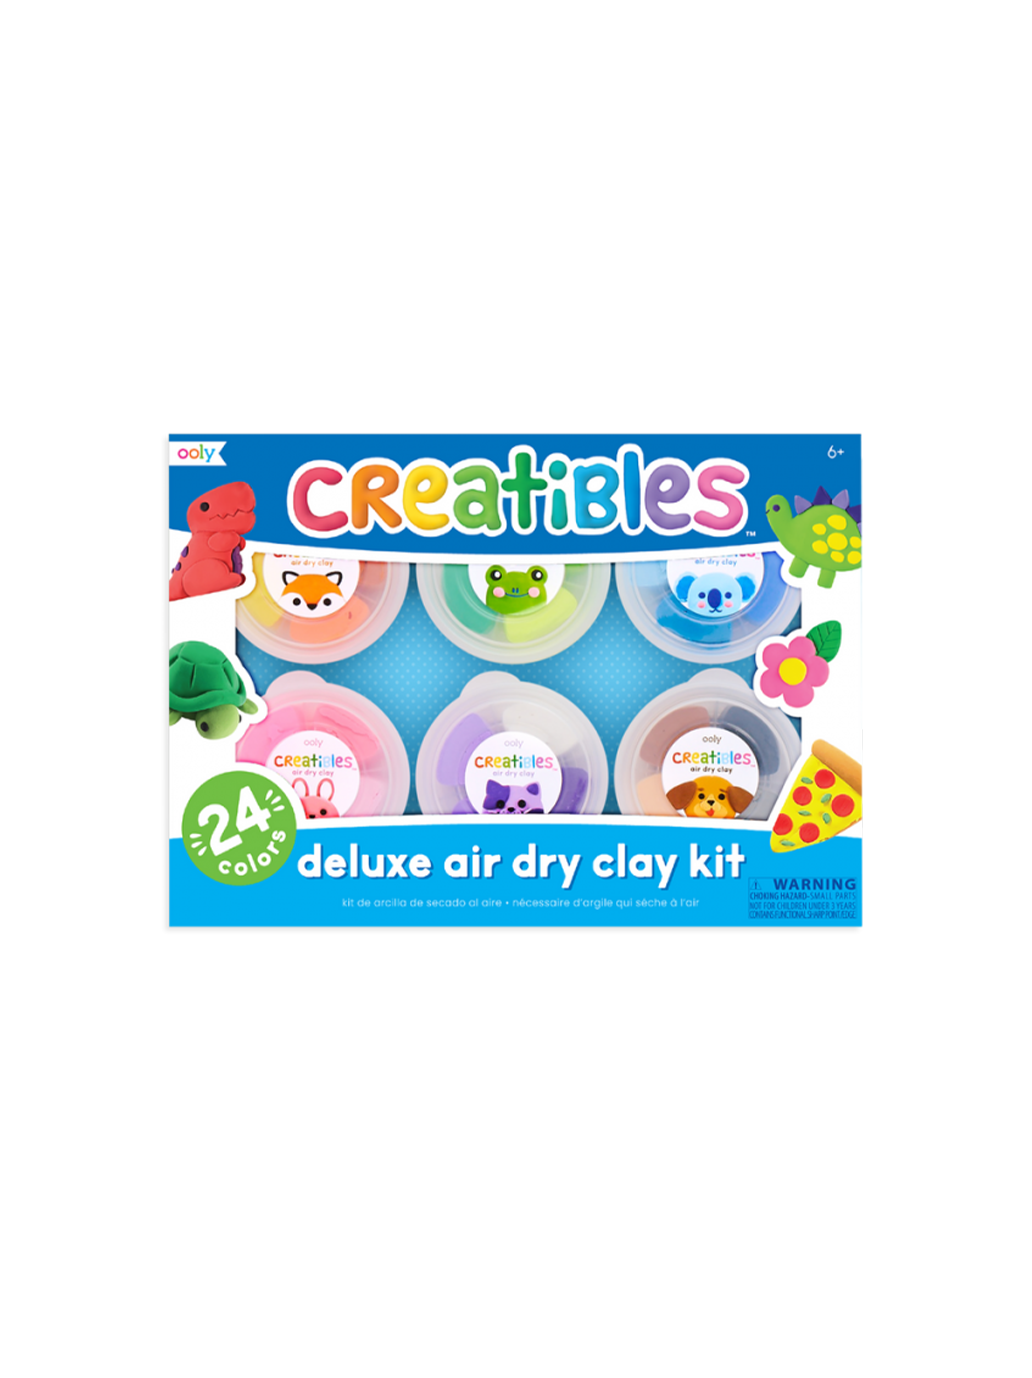 Modelliermasse Creatibles Air Dry Clay Kit 24 Farben